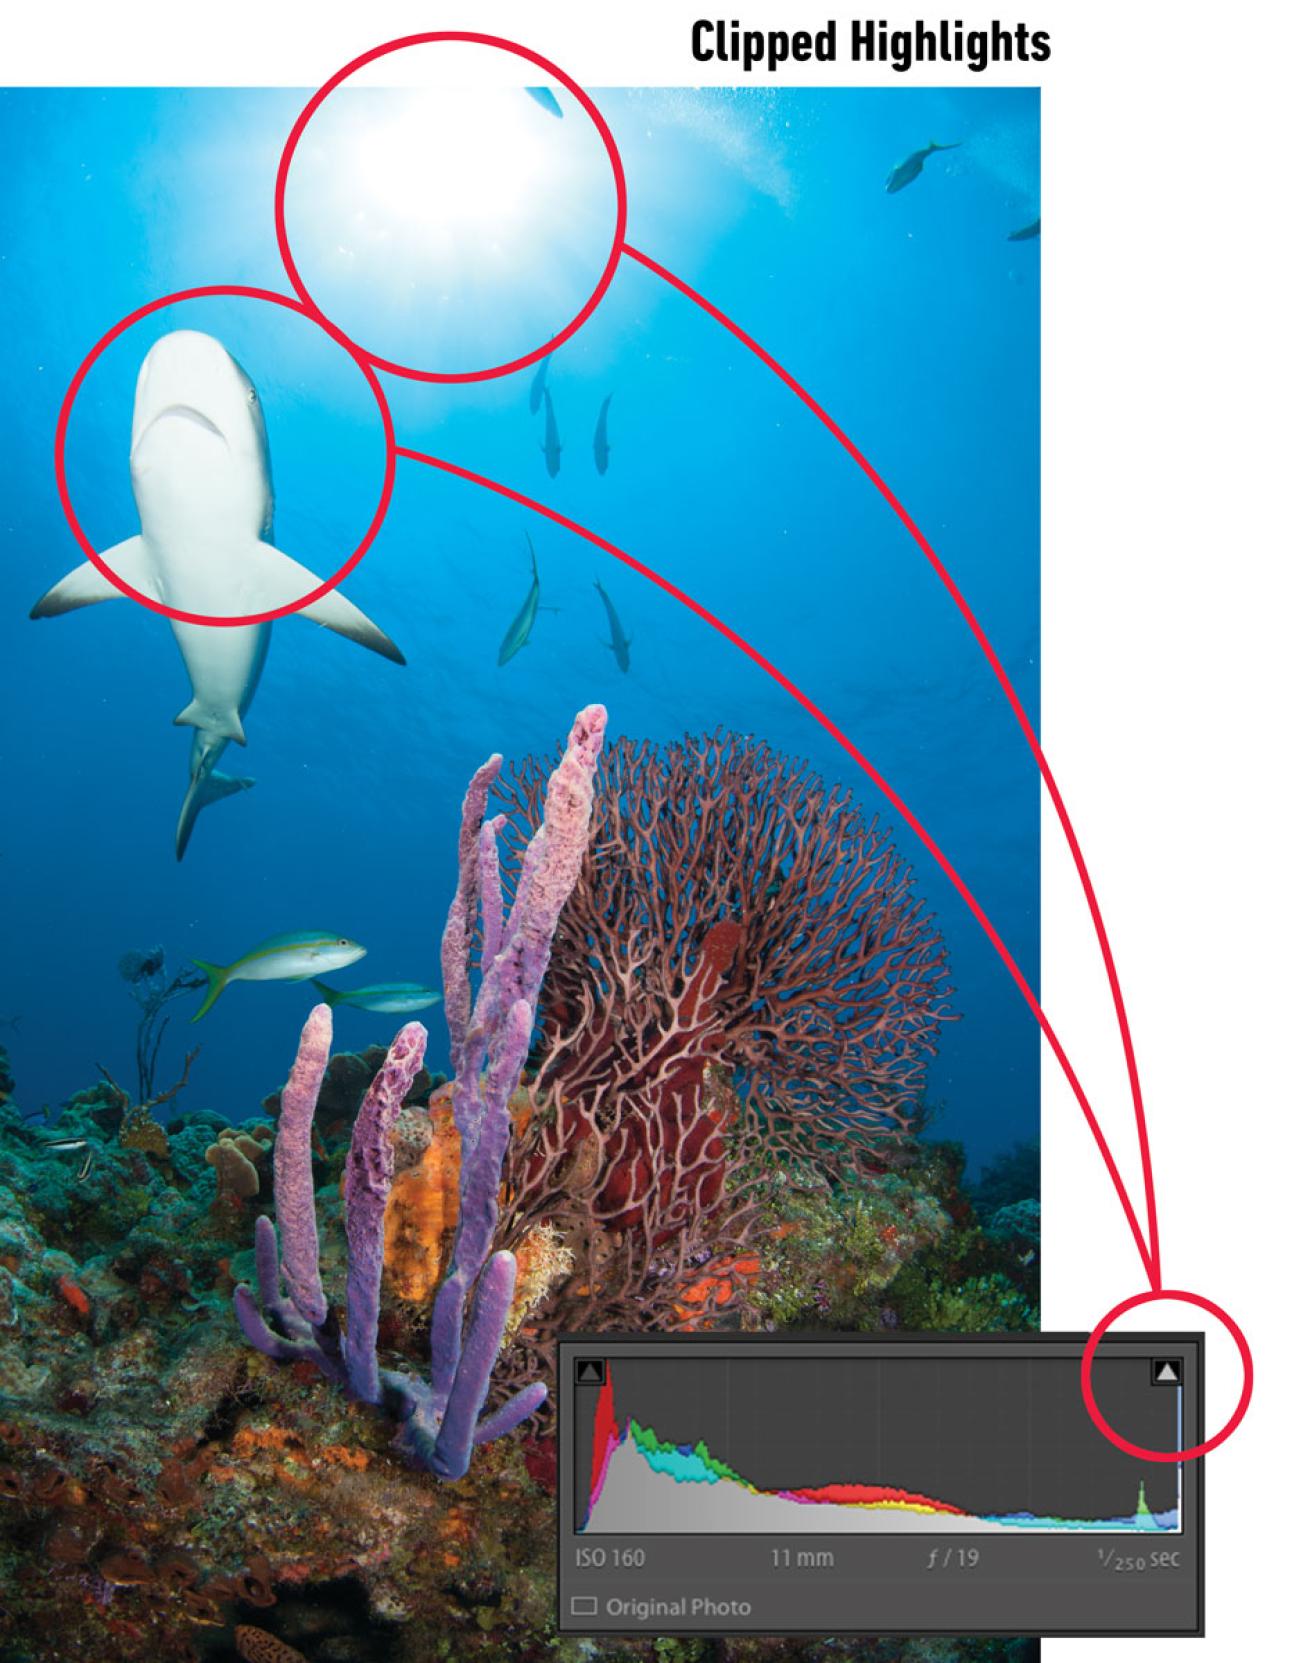 A photo of a shark on a coral reef, explaining imaging exposure 